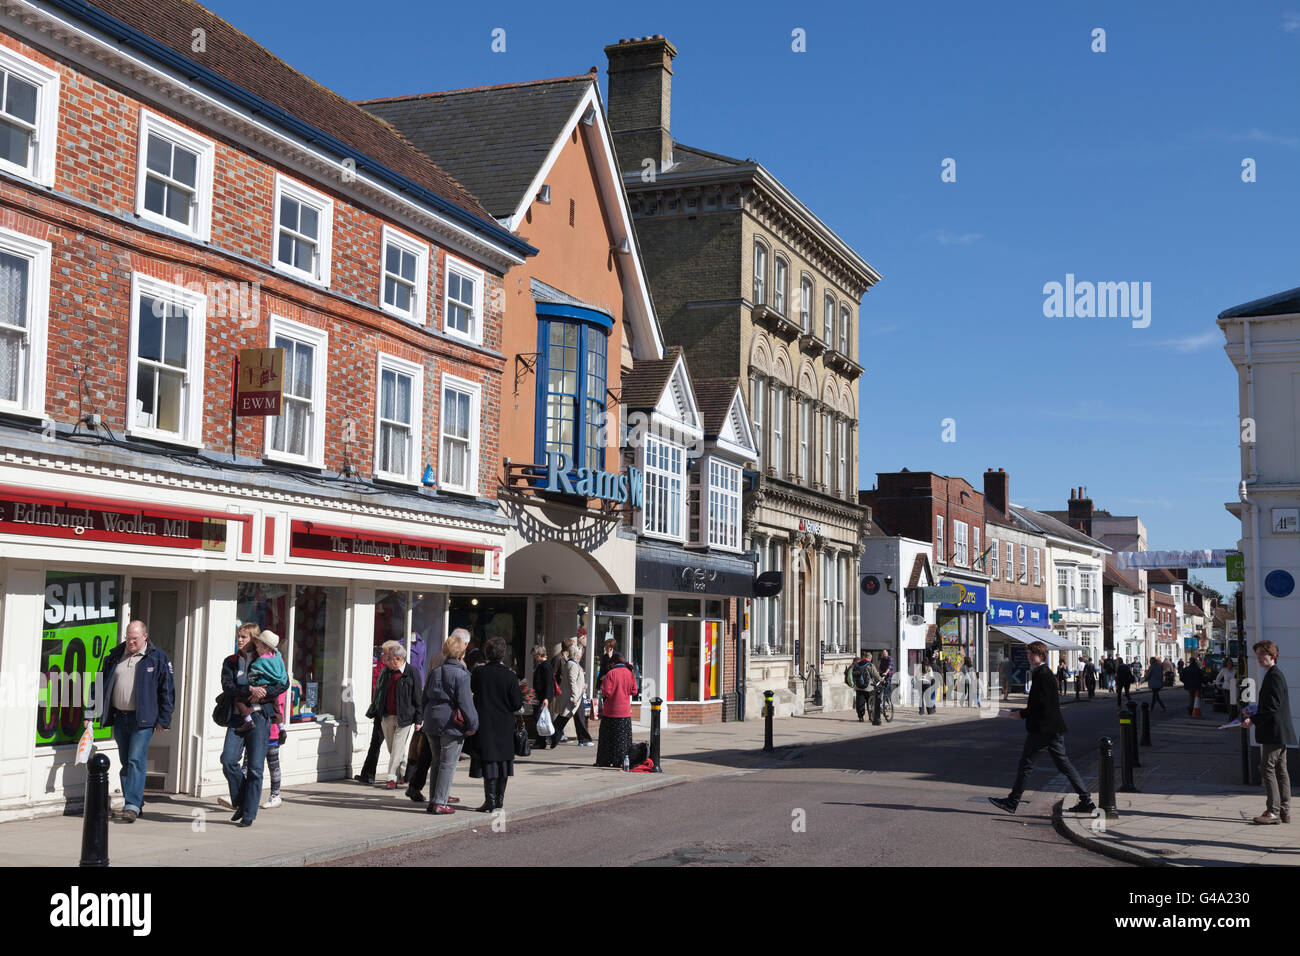 High Street, town centre, Petersfield, Hampshire, England, United Kingdom, Europe Stock Photo